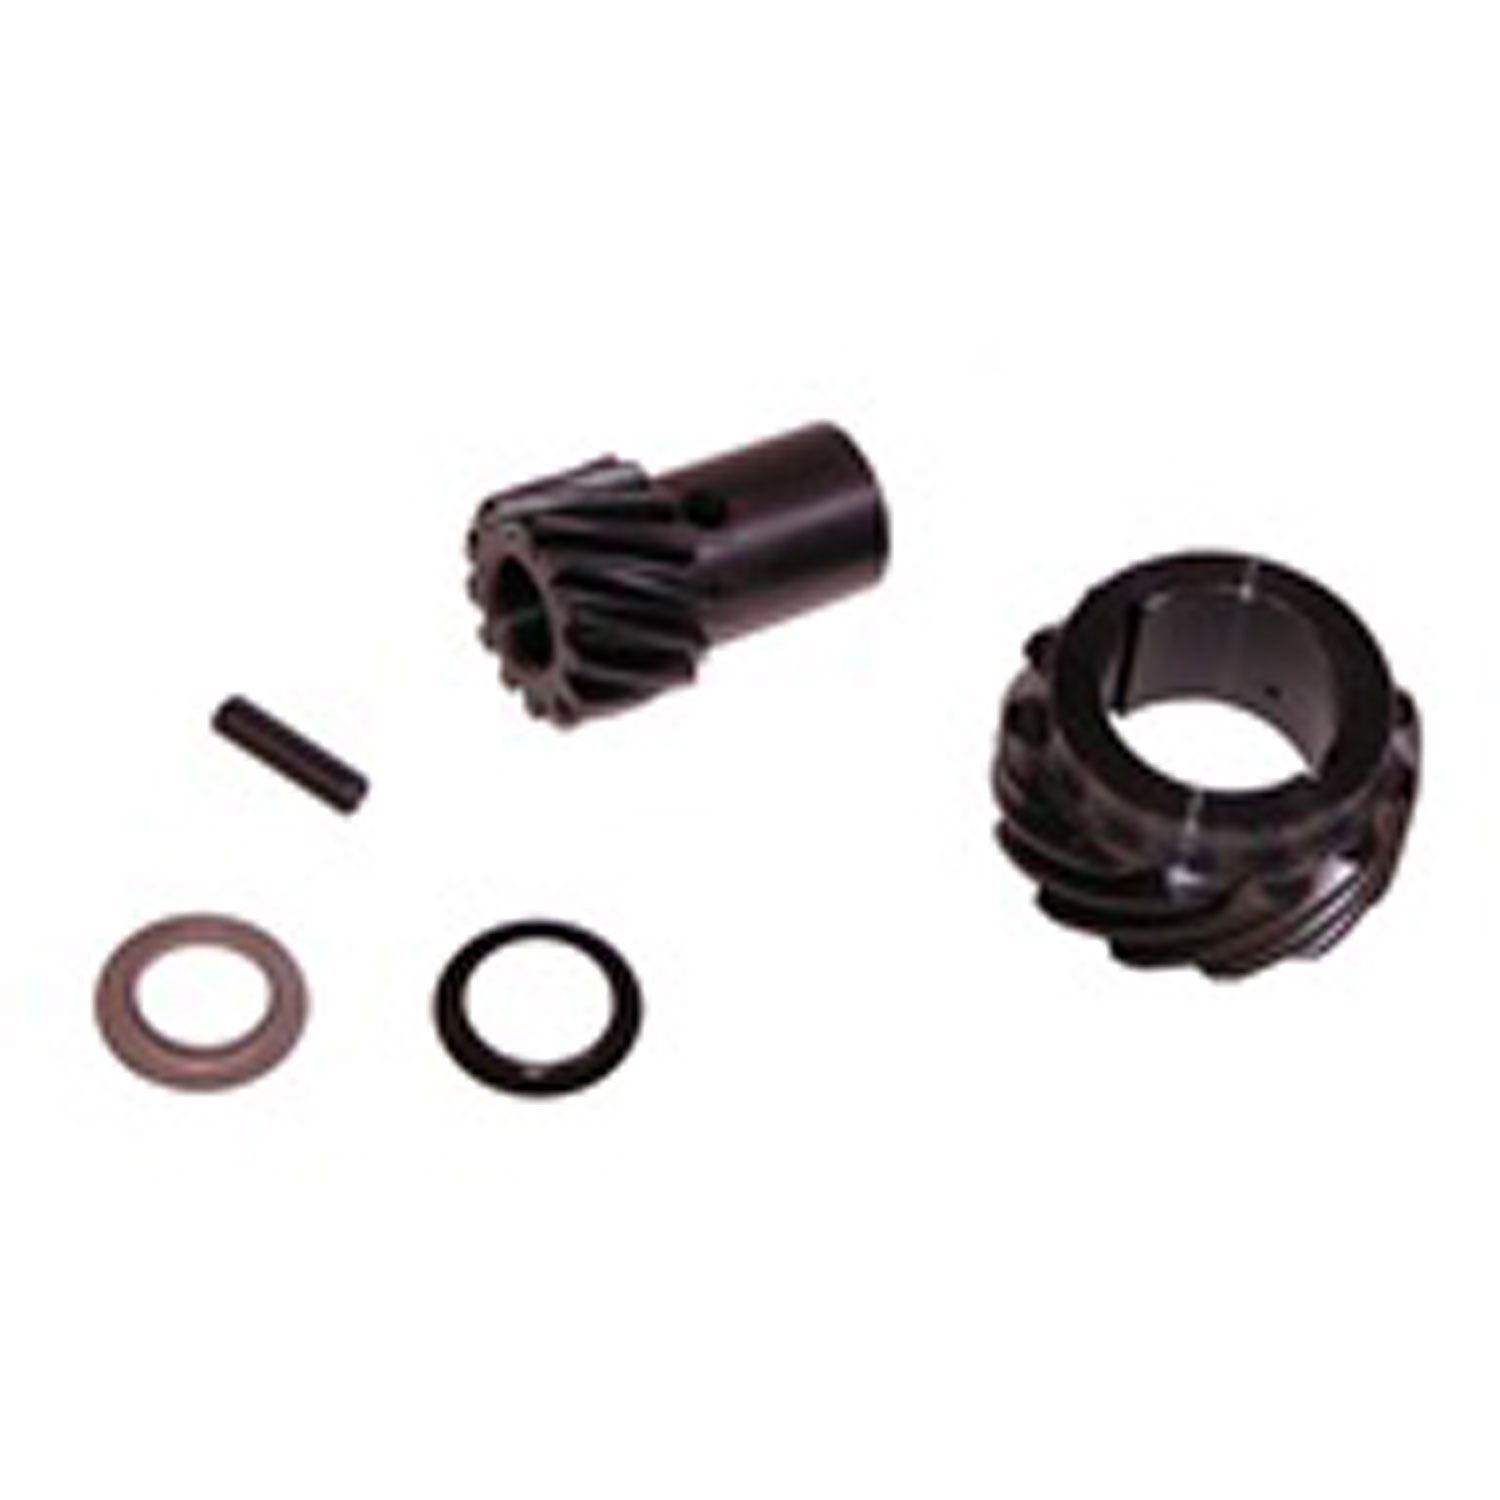 Cam & Distributor Drive Gear Kit for 1967-1991 AMC/Jeep Vehicles [290, 304, 343, 360, 390 & 401 V8 Engines]